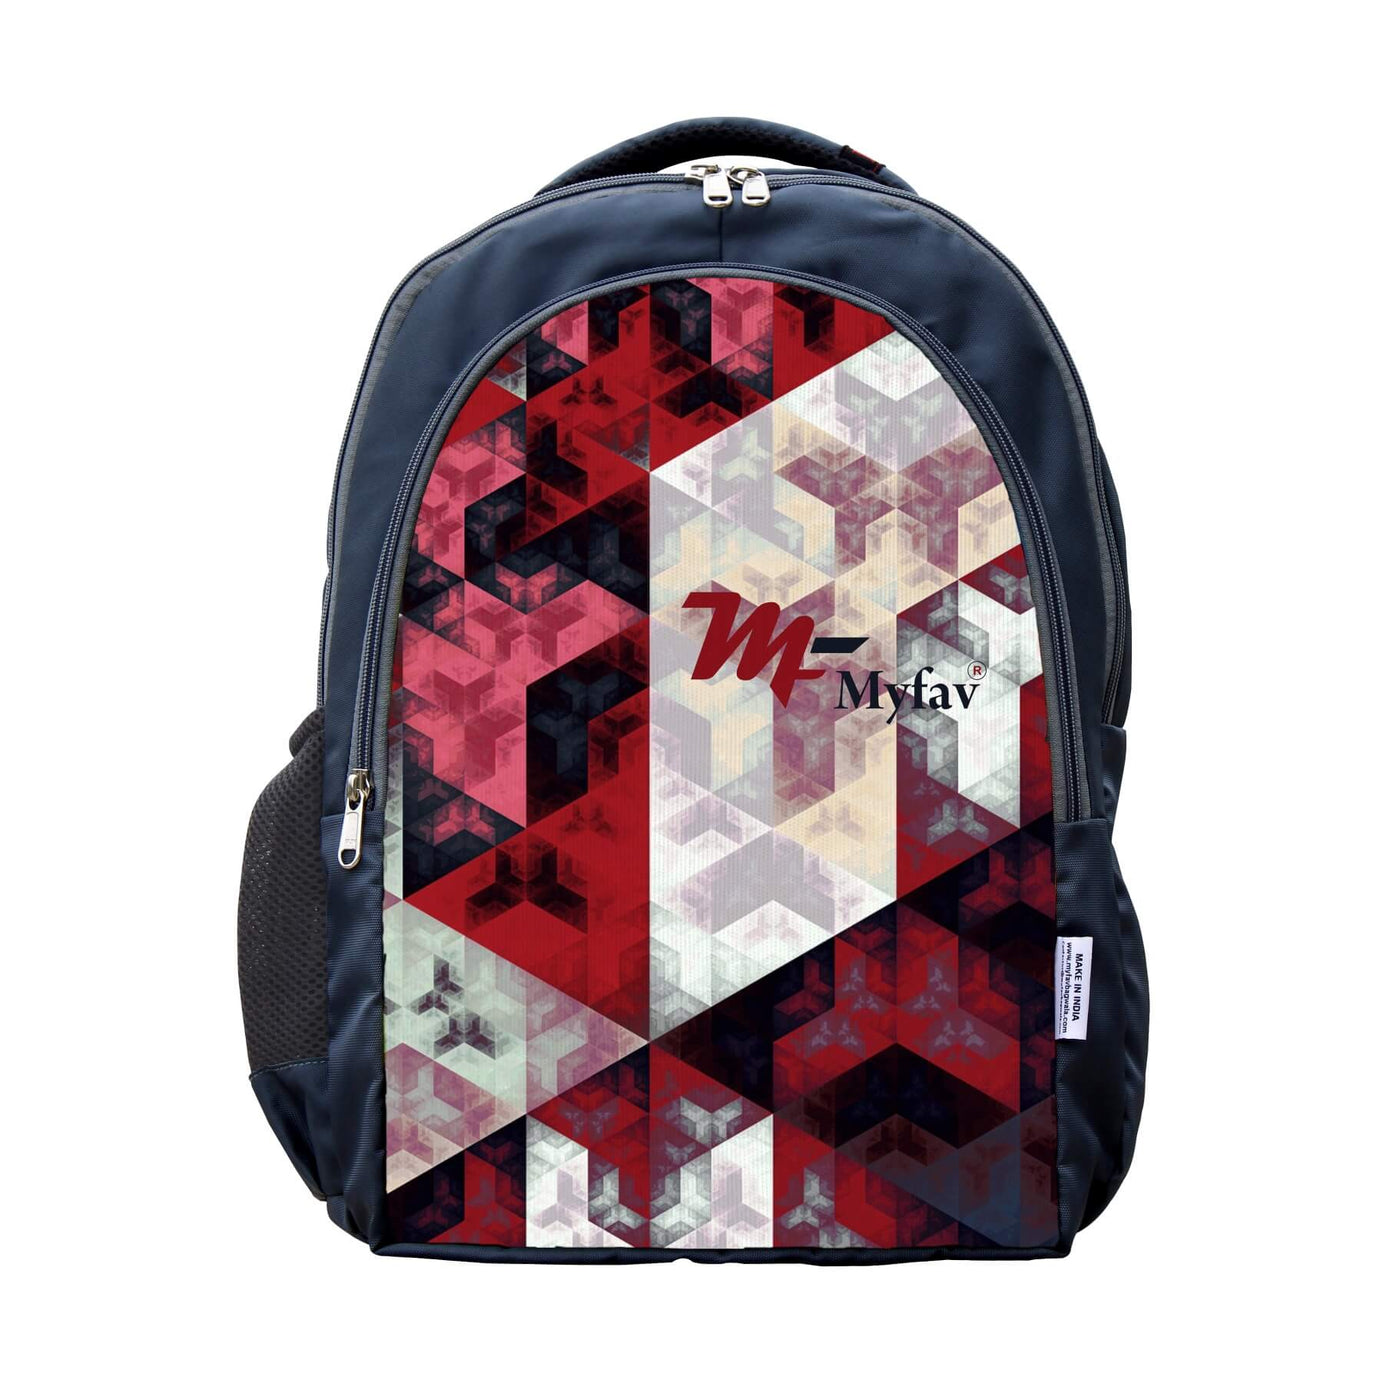 MY FAV Digital Print School College Backpack with Laptop Compartment For Boys & Girls 30 L Laptop Backpack